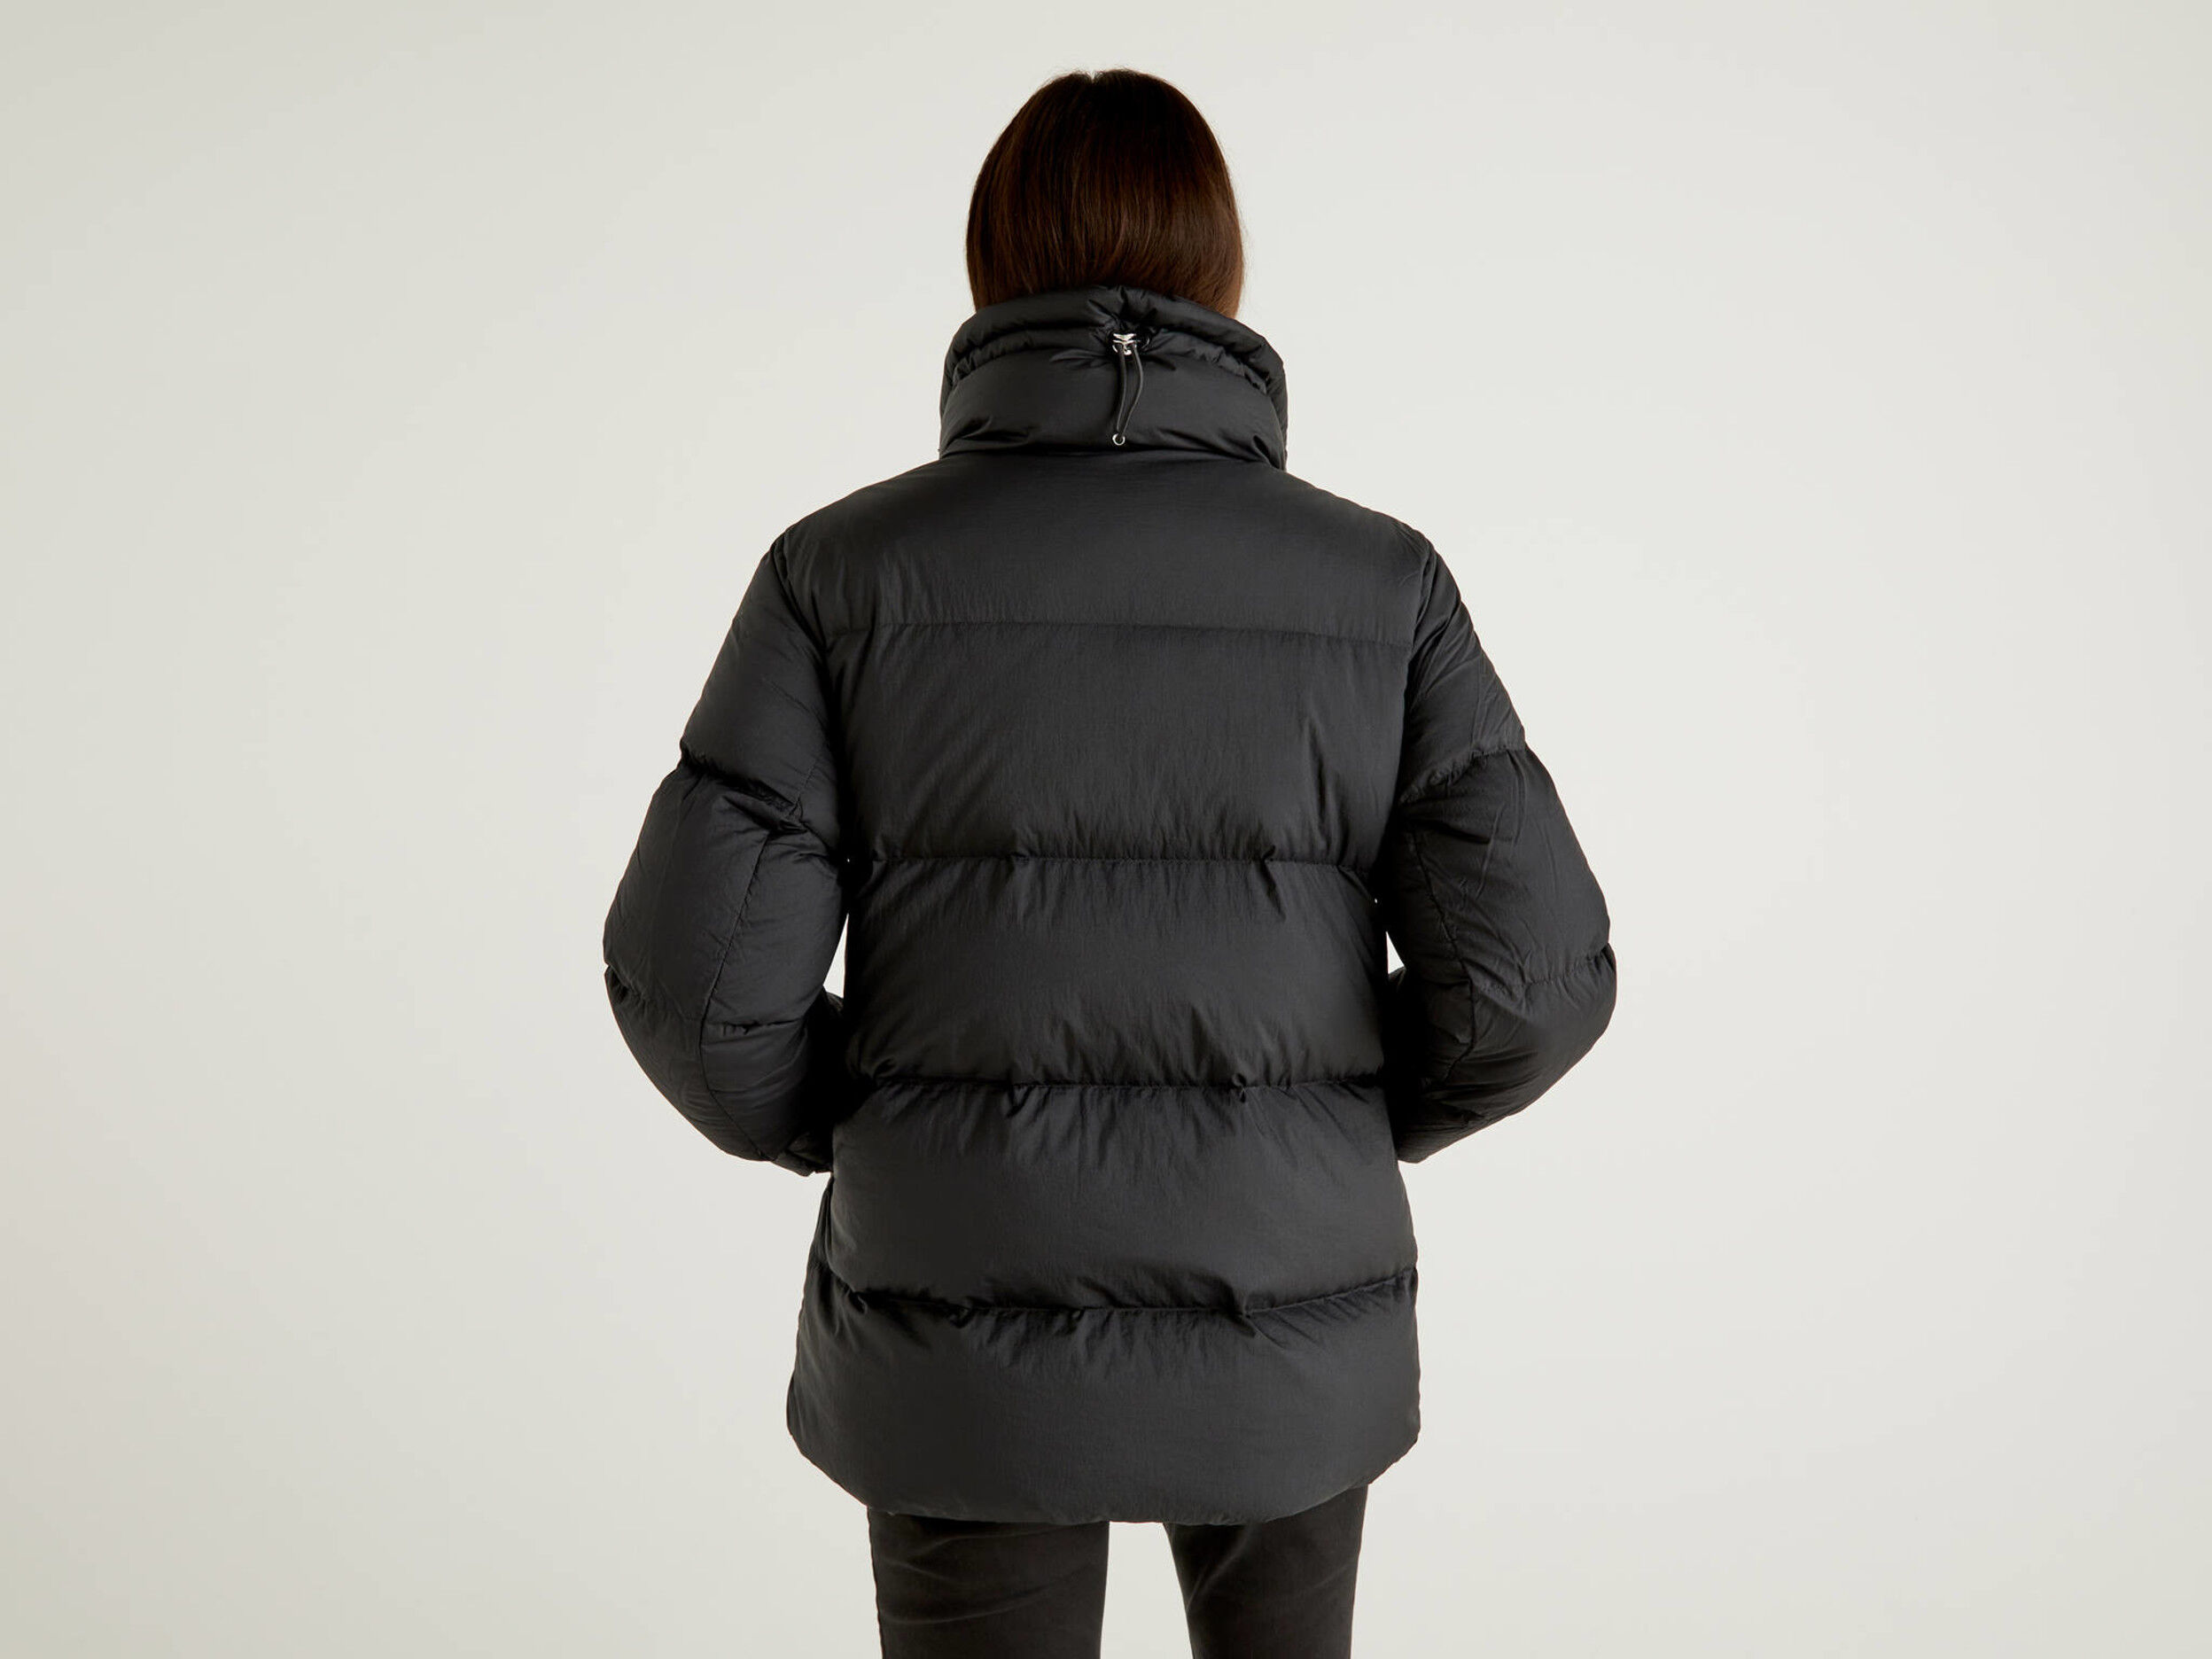 Midi puffer jacket with wide collar